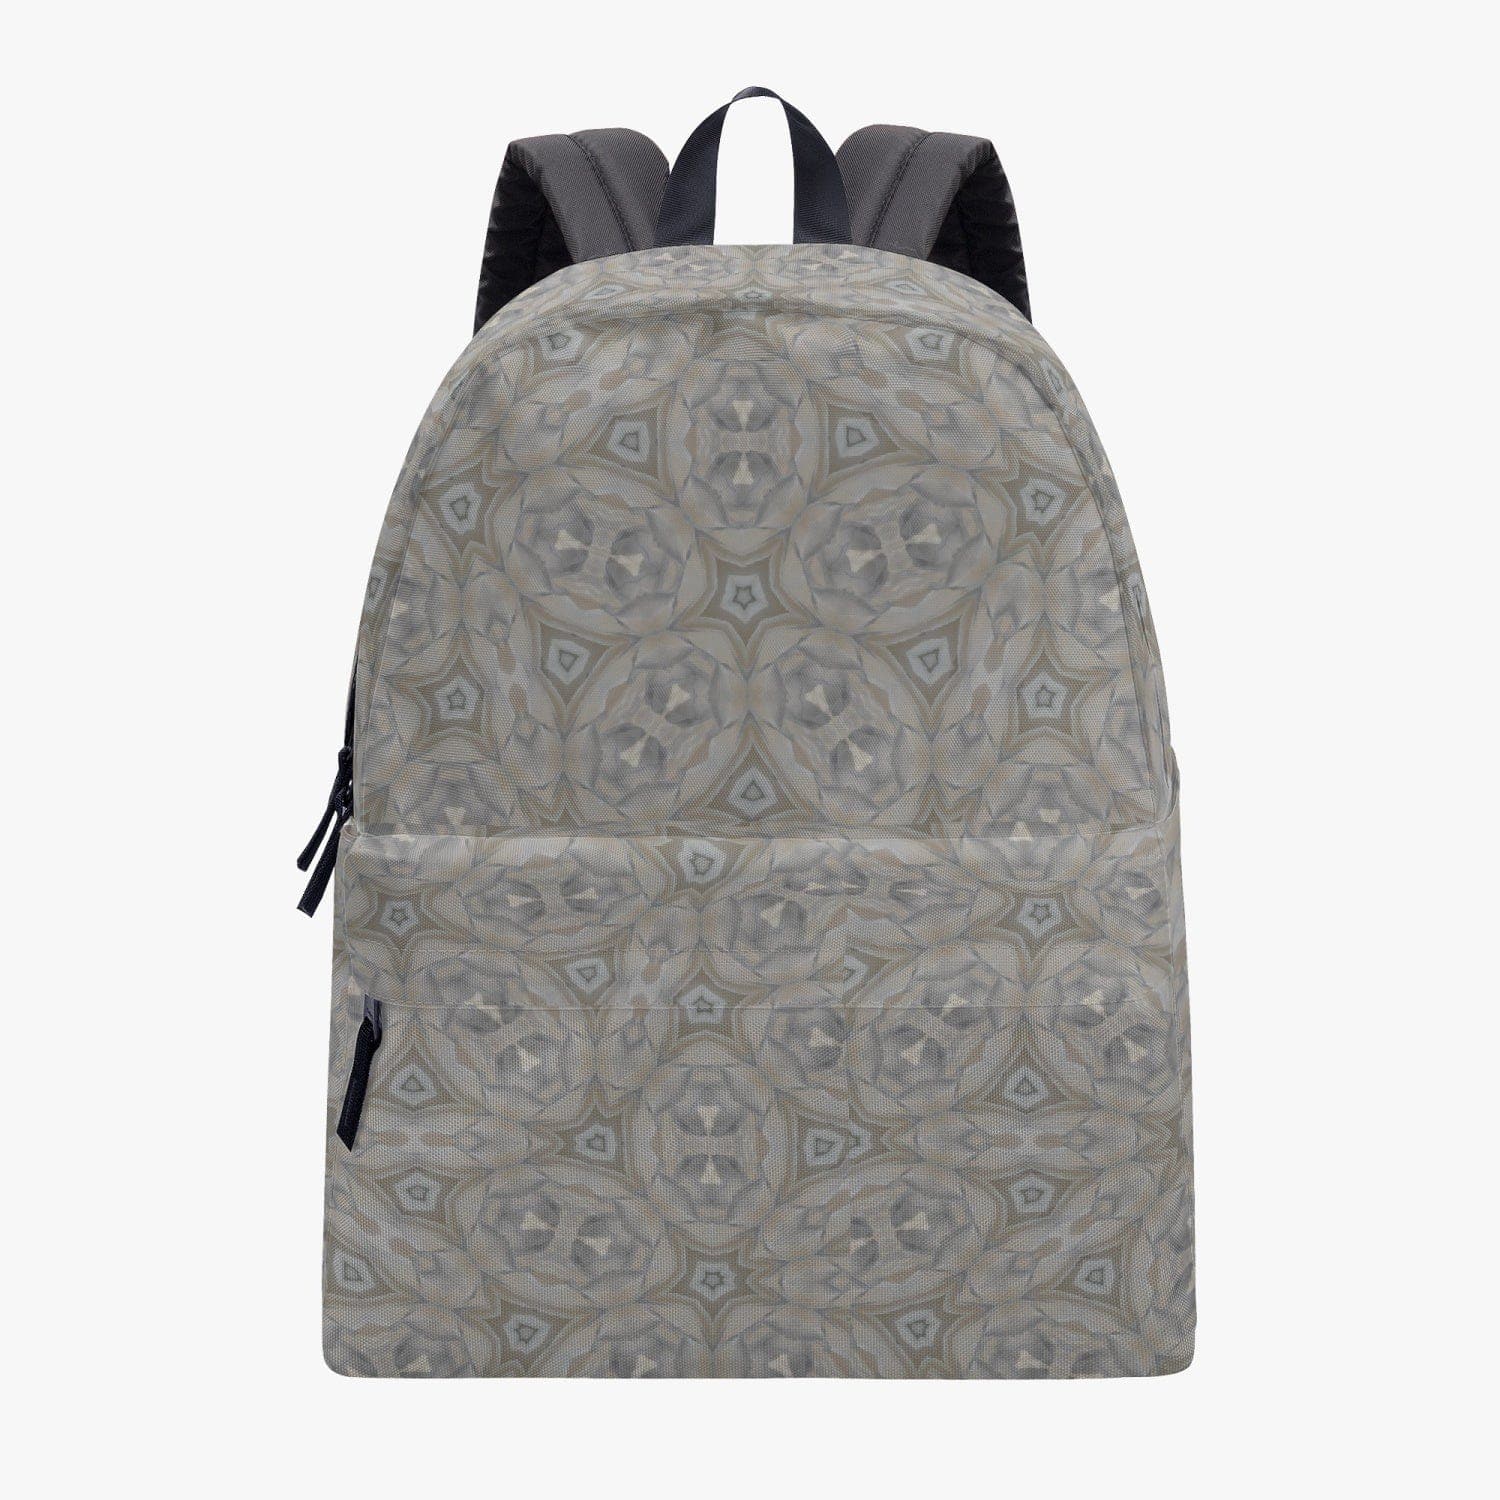 Shades of a white rose,  Cotton Canvas Backpack, designed by Sensus Studio Design